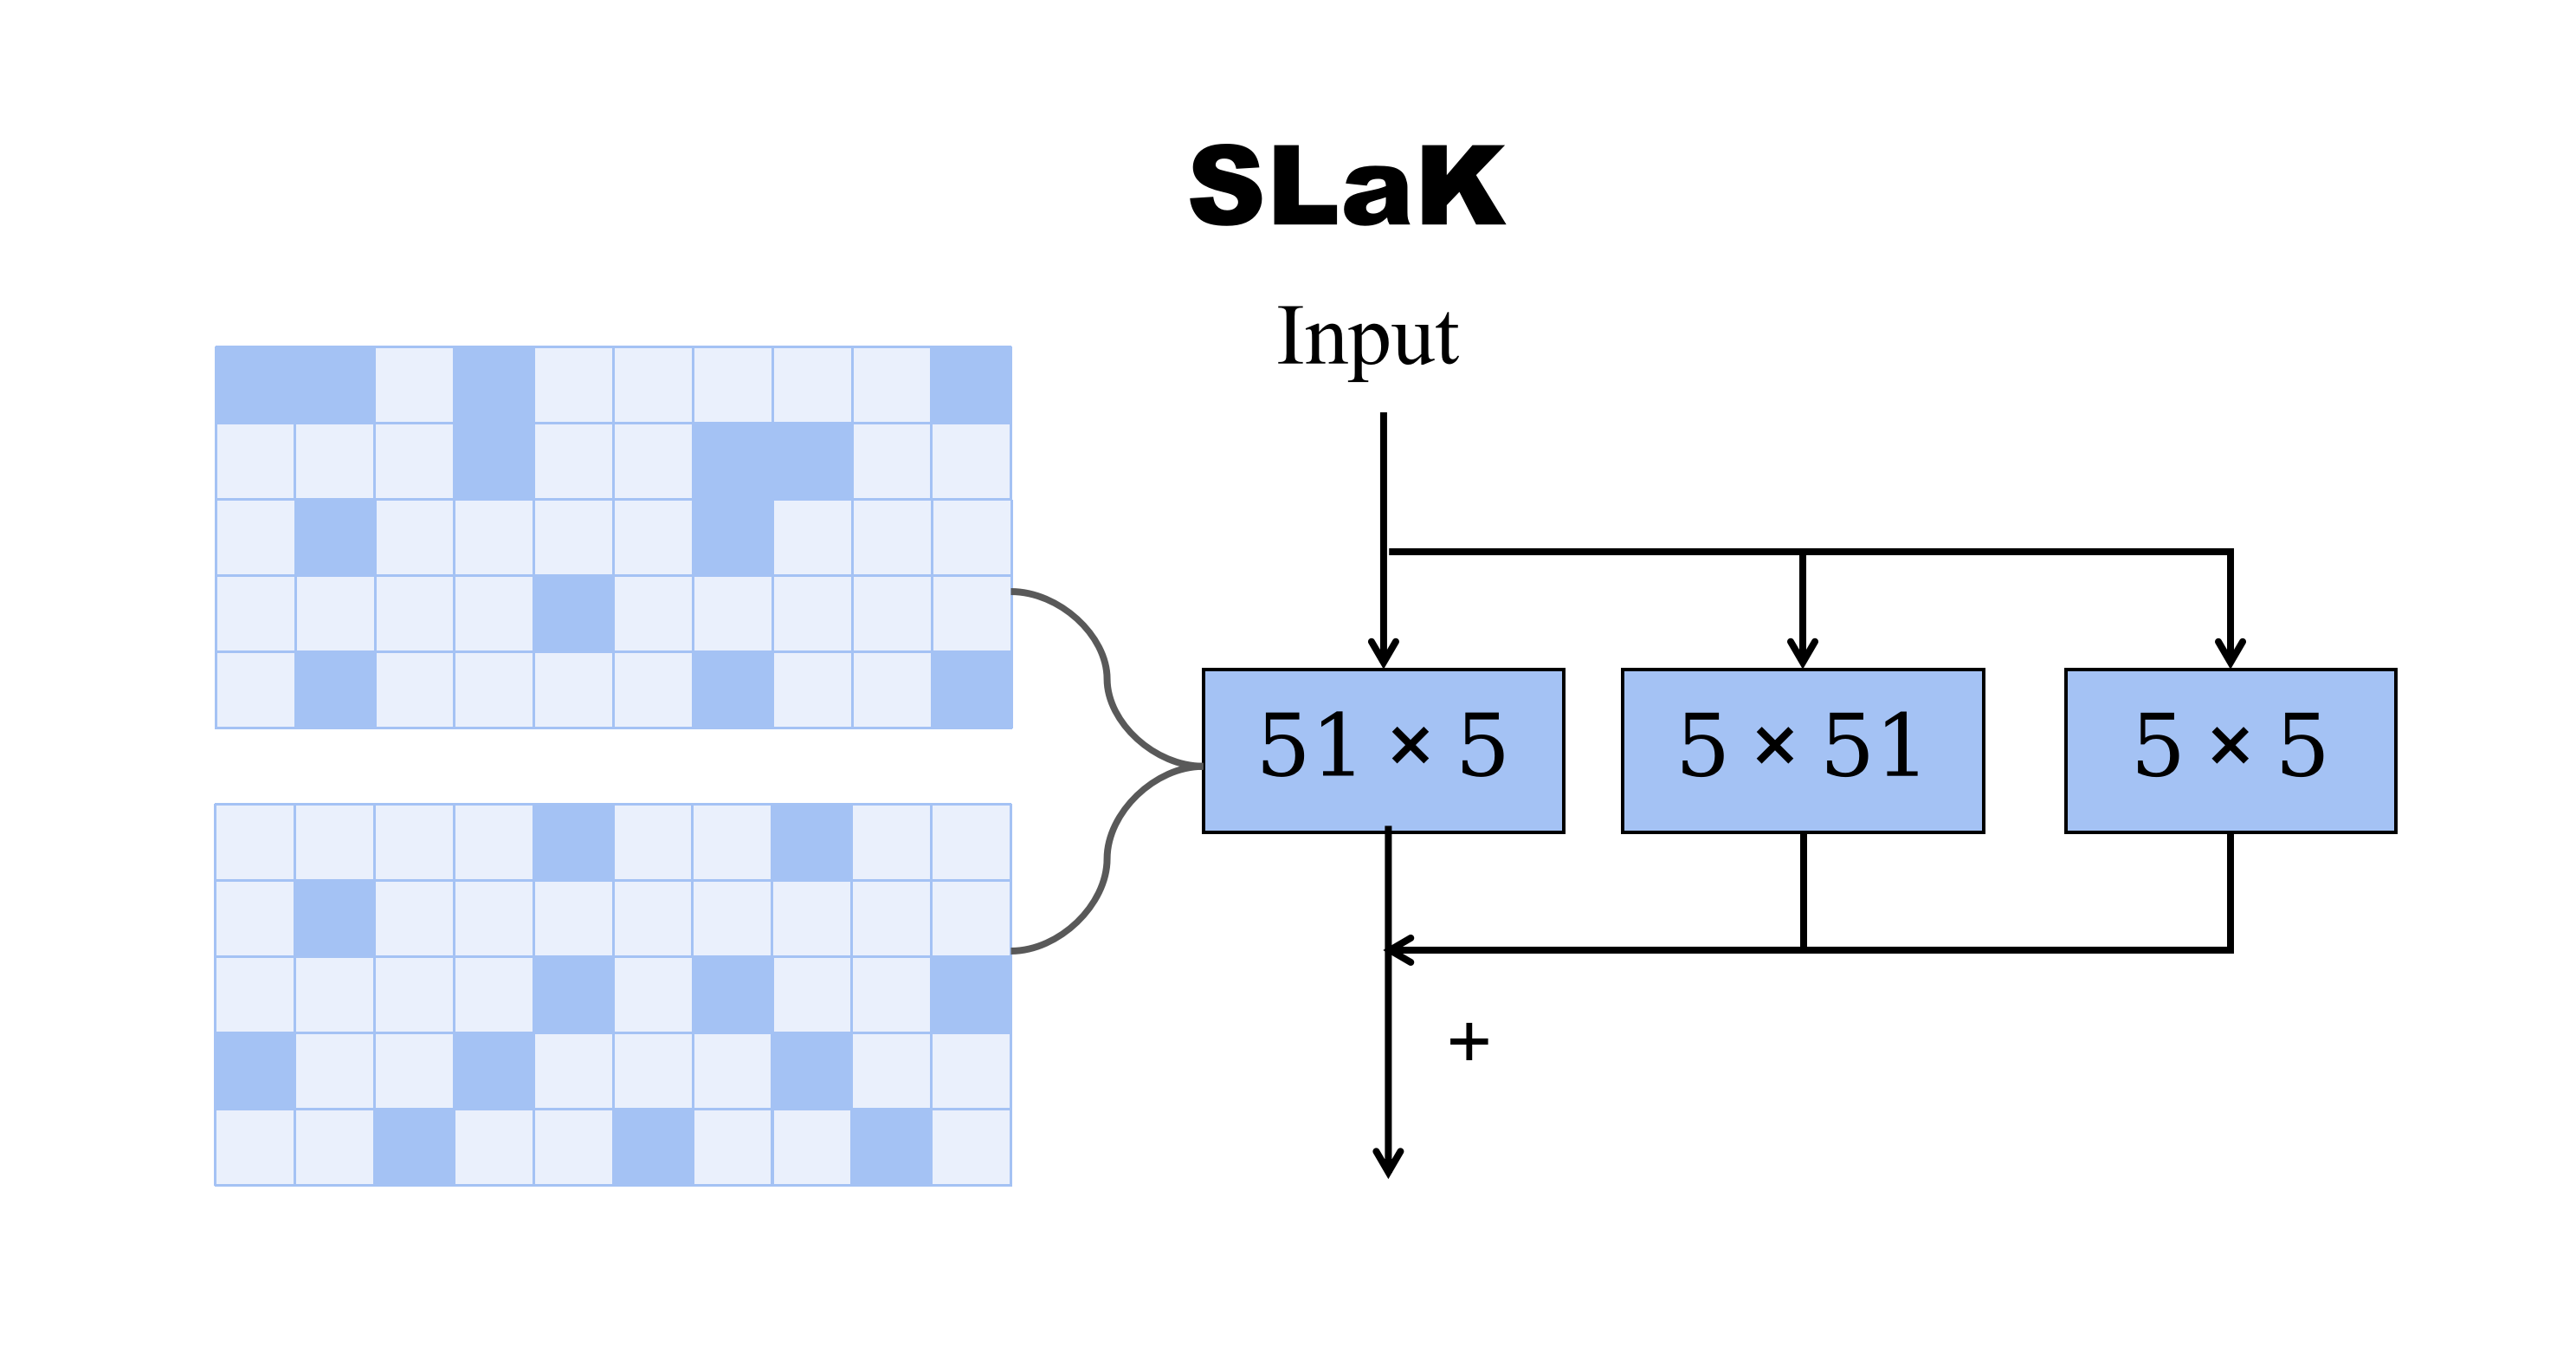 More ConvNets in the 2020s: Scaling up Kernels Beyond 51x51 using Sparsity  | Papers With Code